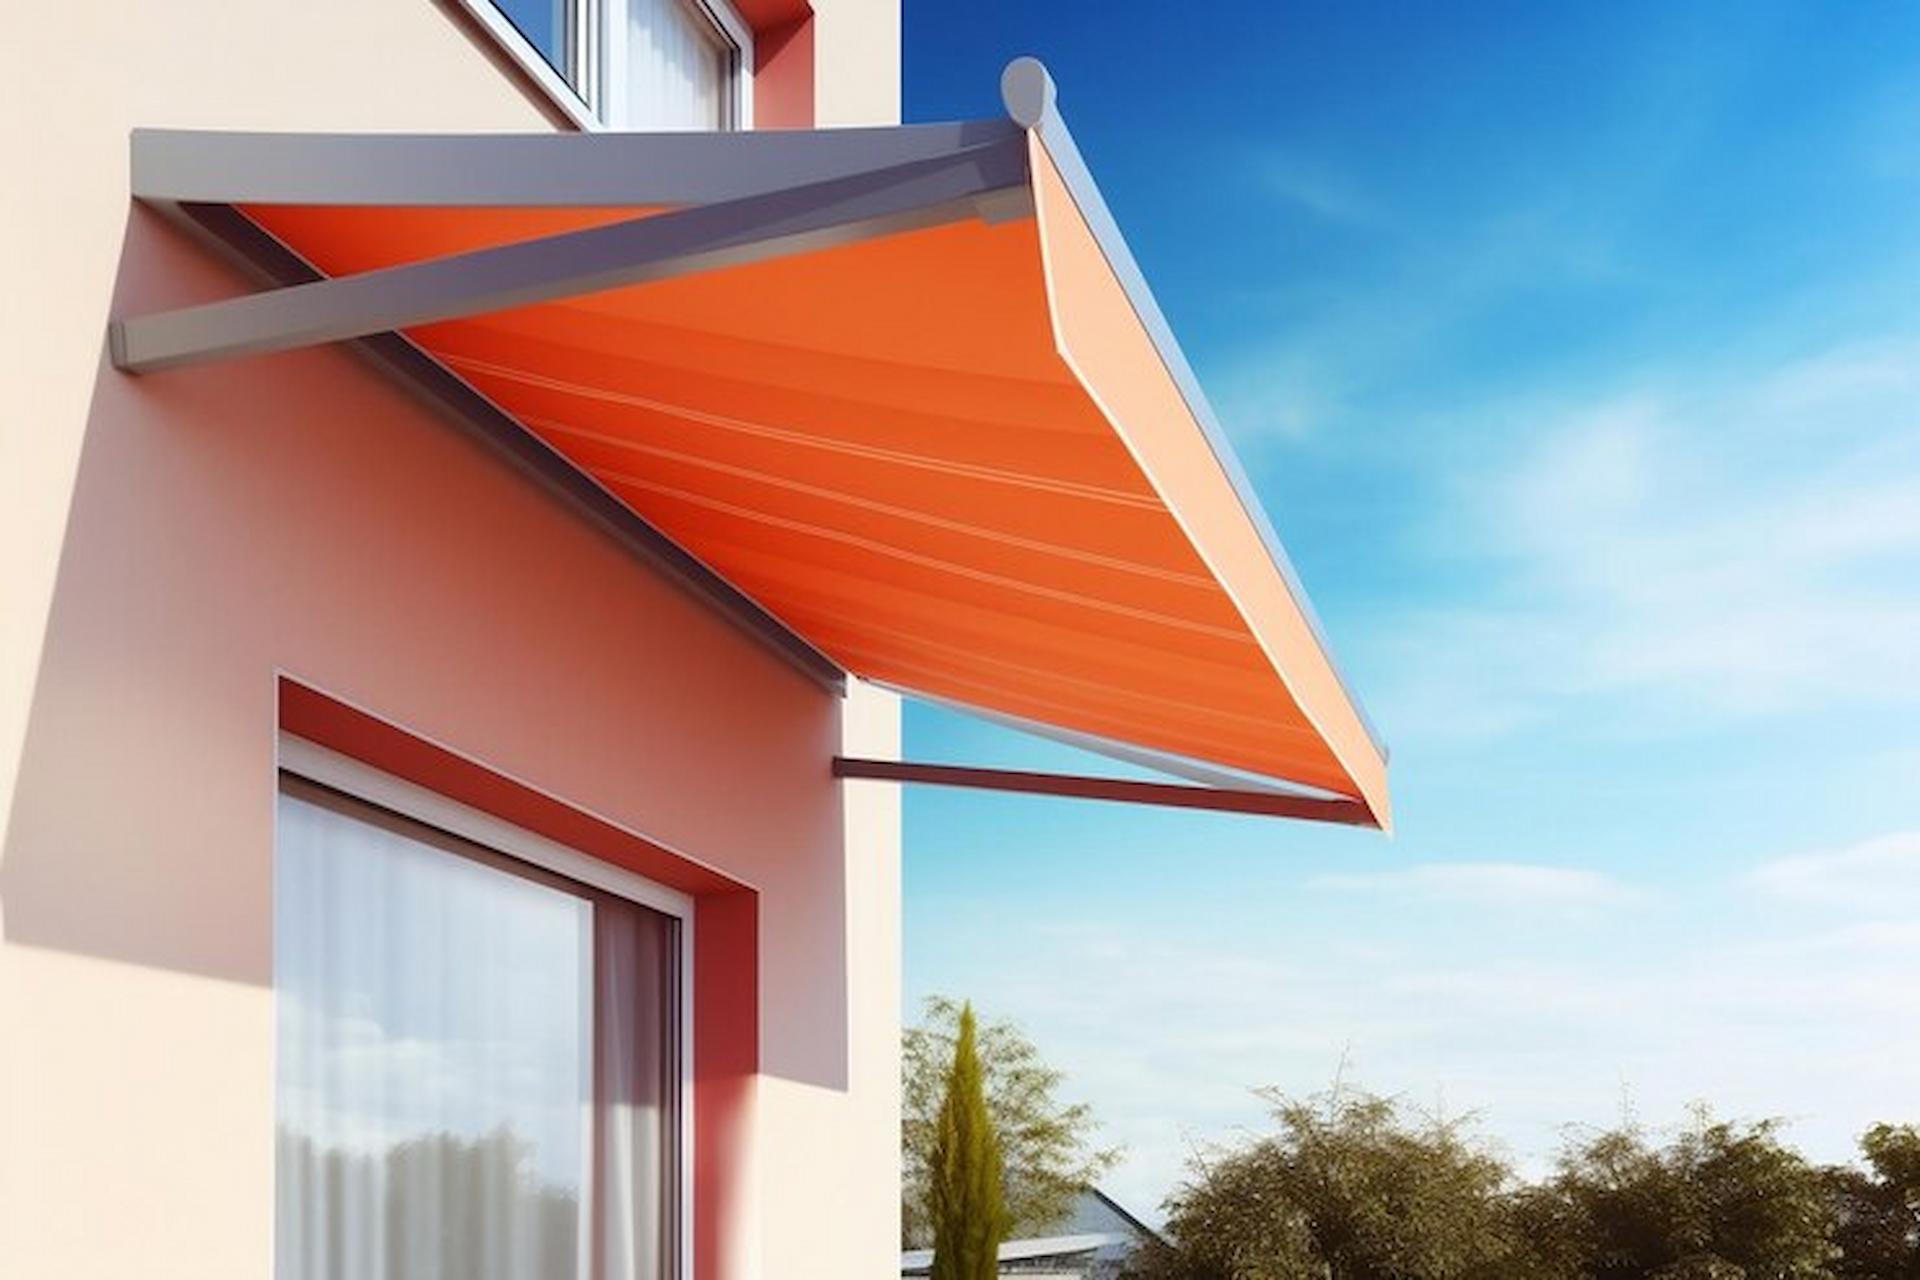 House awnings